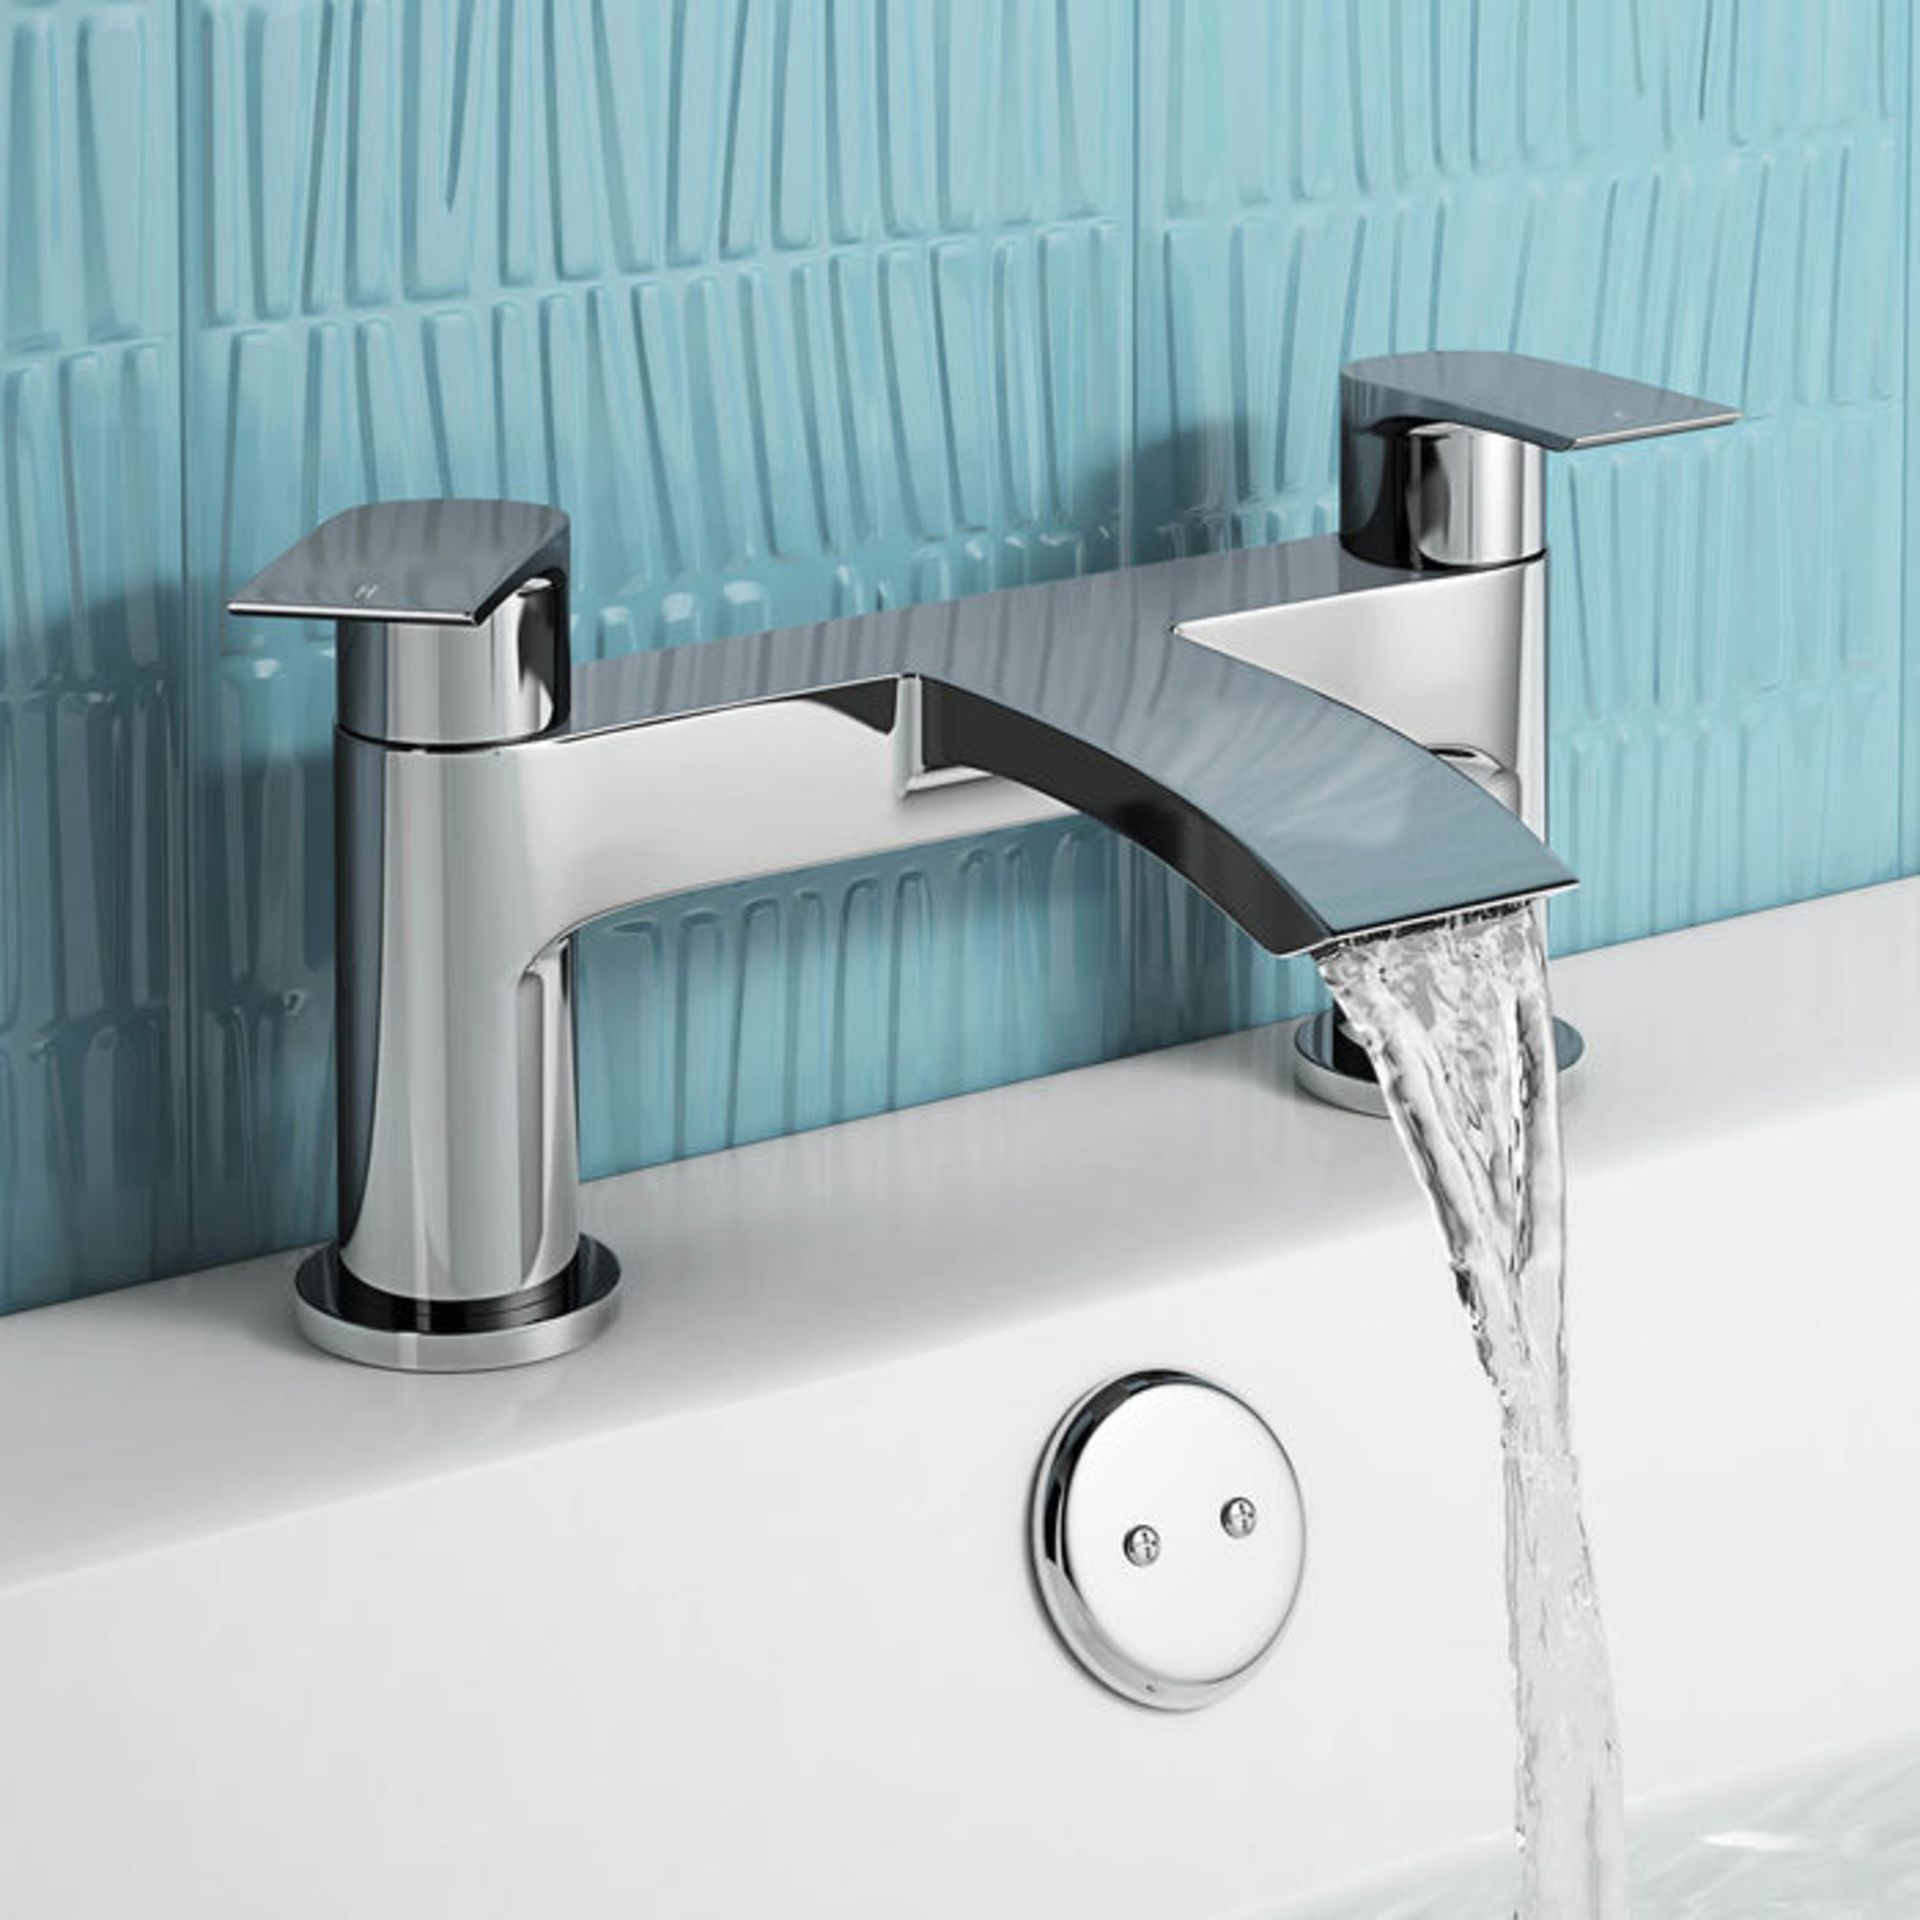 (ZL40) Melbourne Bath Filler Mixer Tap Chrome Plated Solid Brass 1/4 turn solid brass valve with